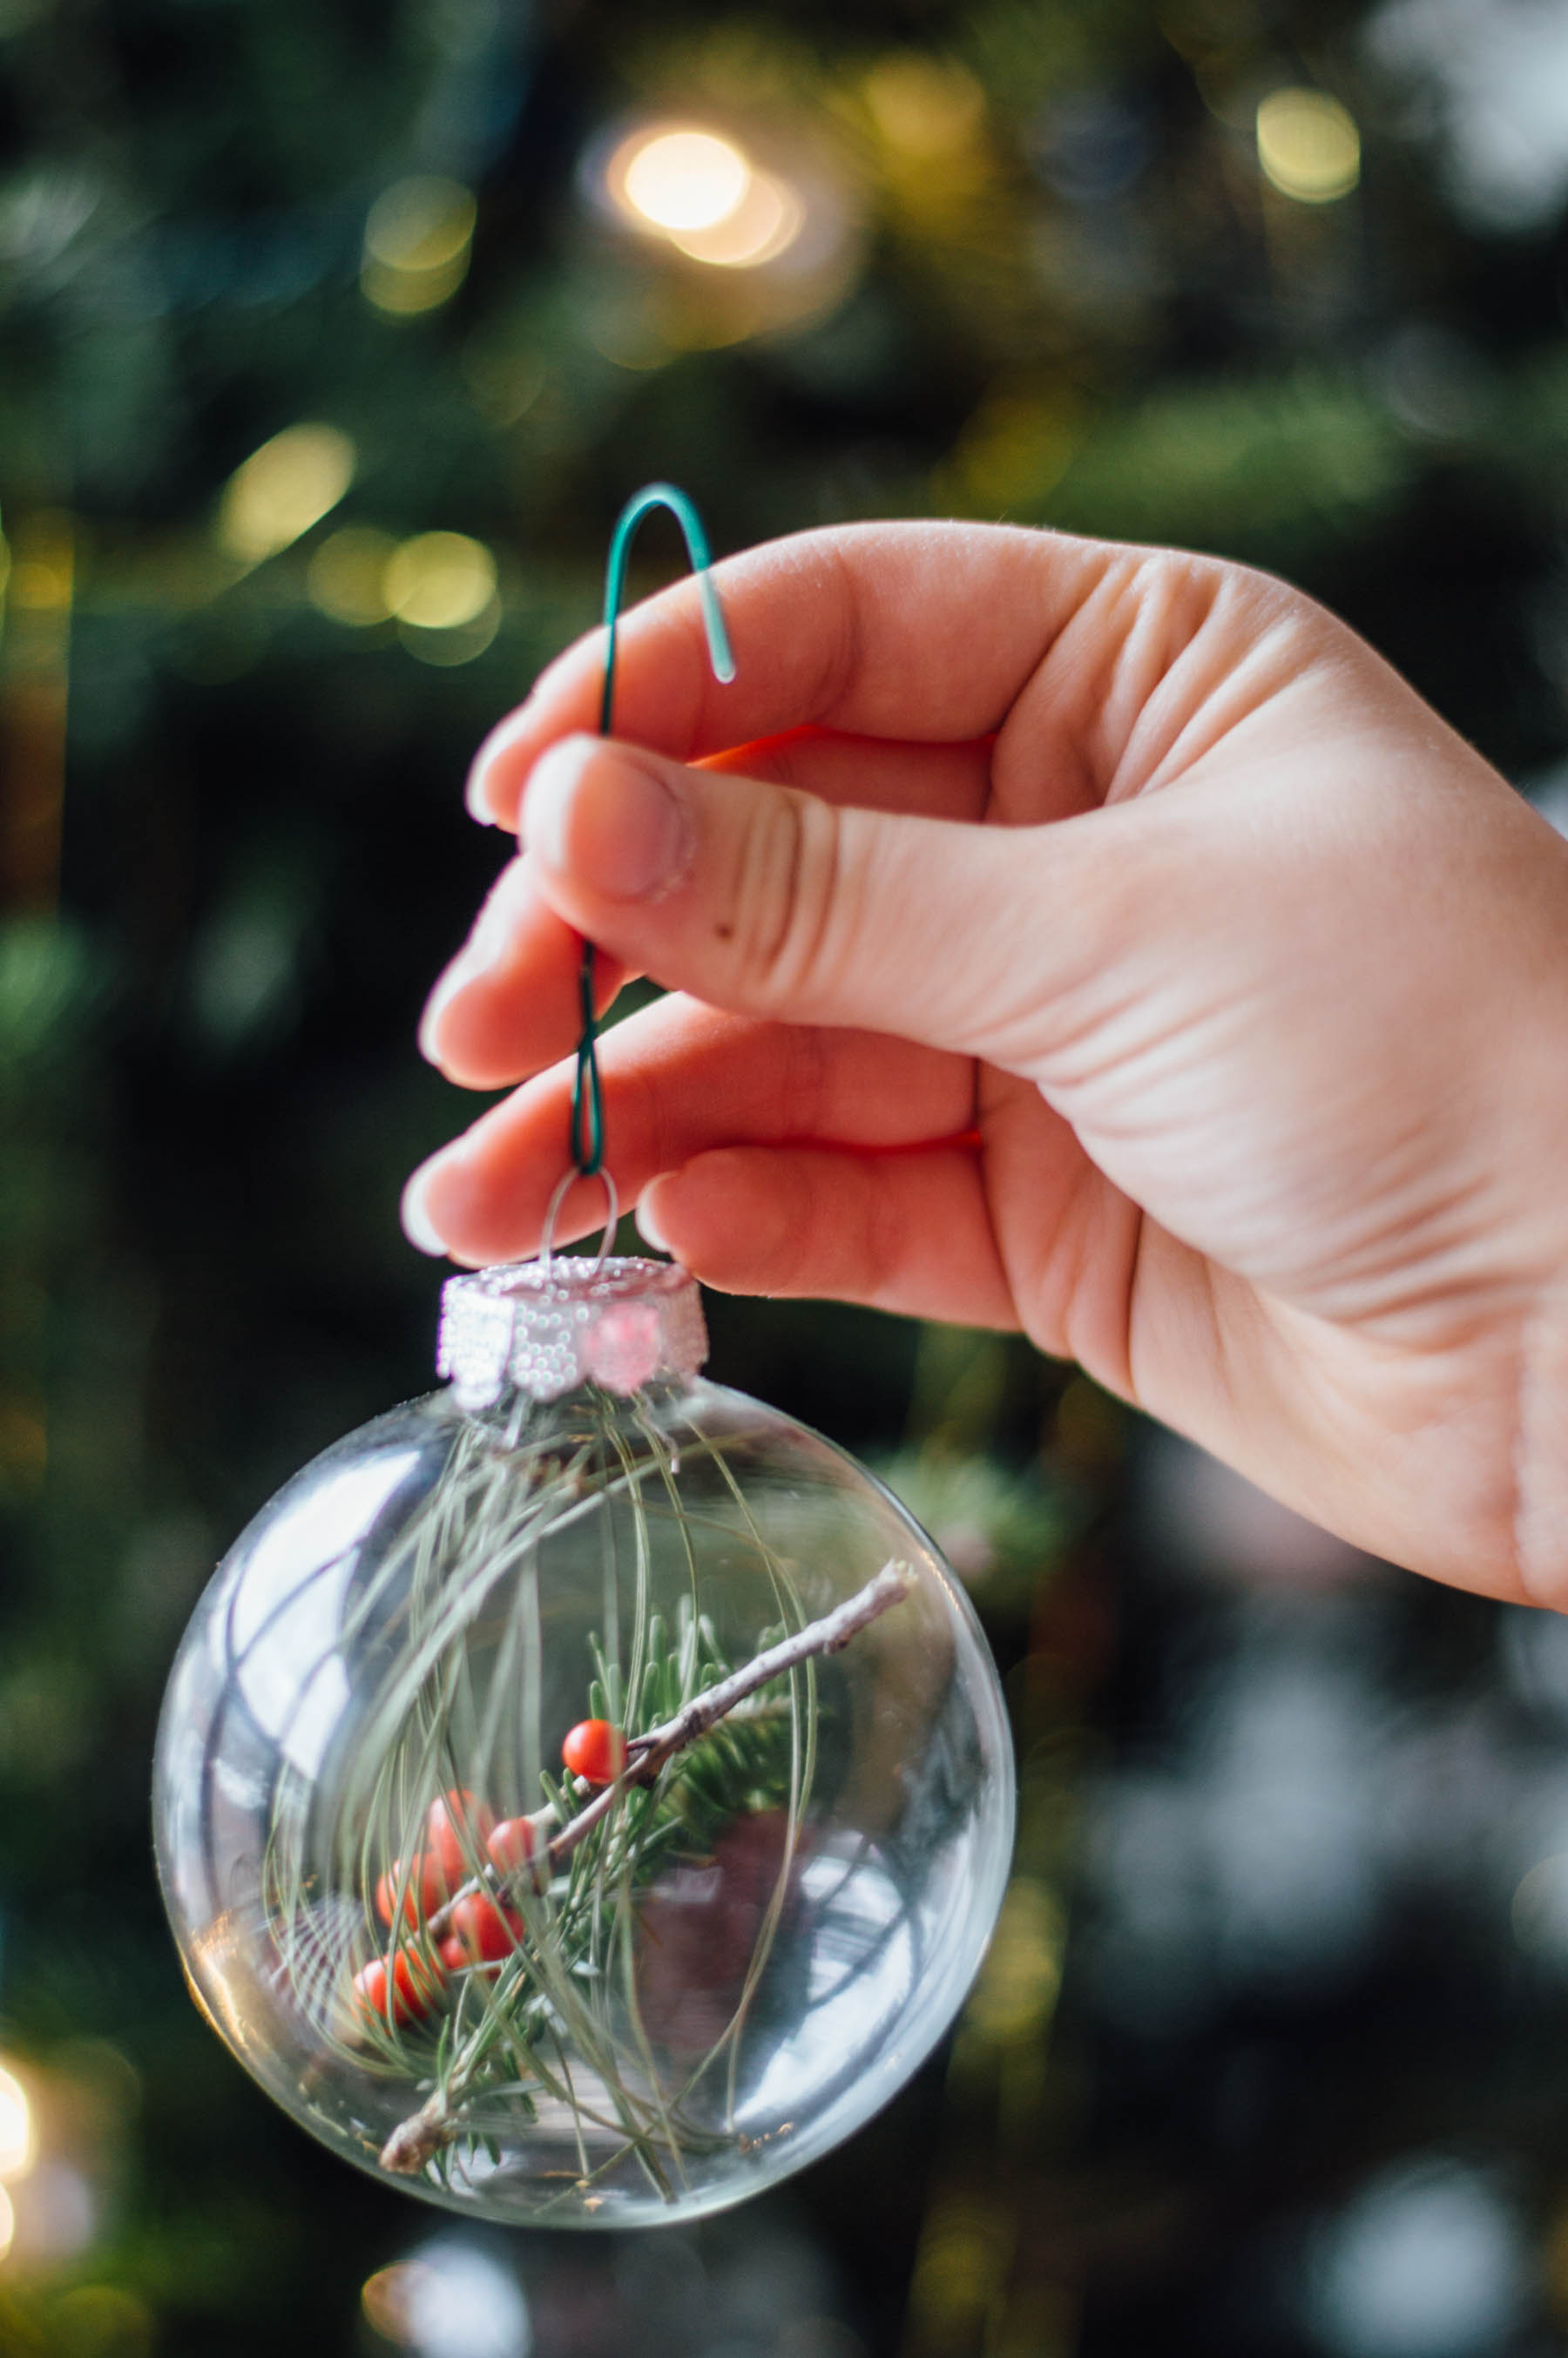 Easy DIY Christmas Ornaments to make on Christmas Eve with your family - save them as a keepsake for year's to come. | bygabriella.co